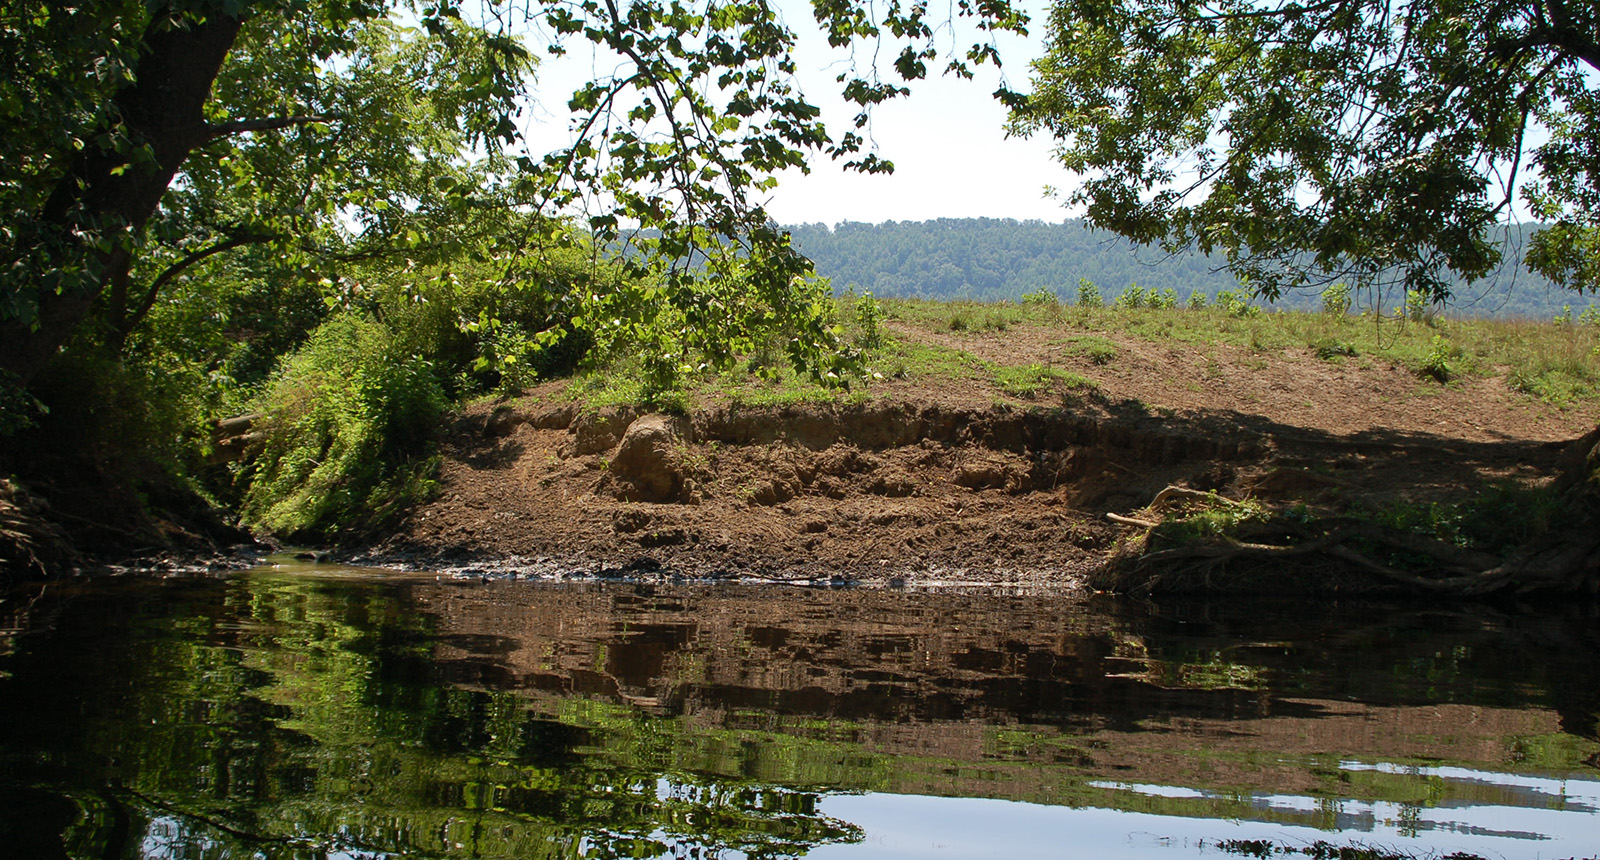 An image of an eroded riverbank